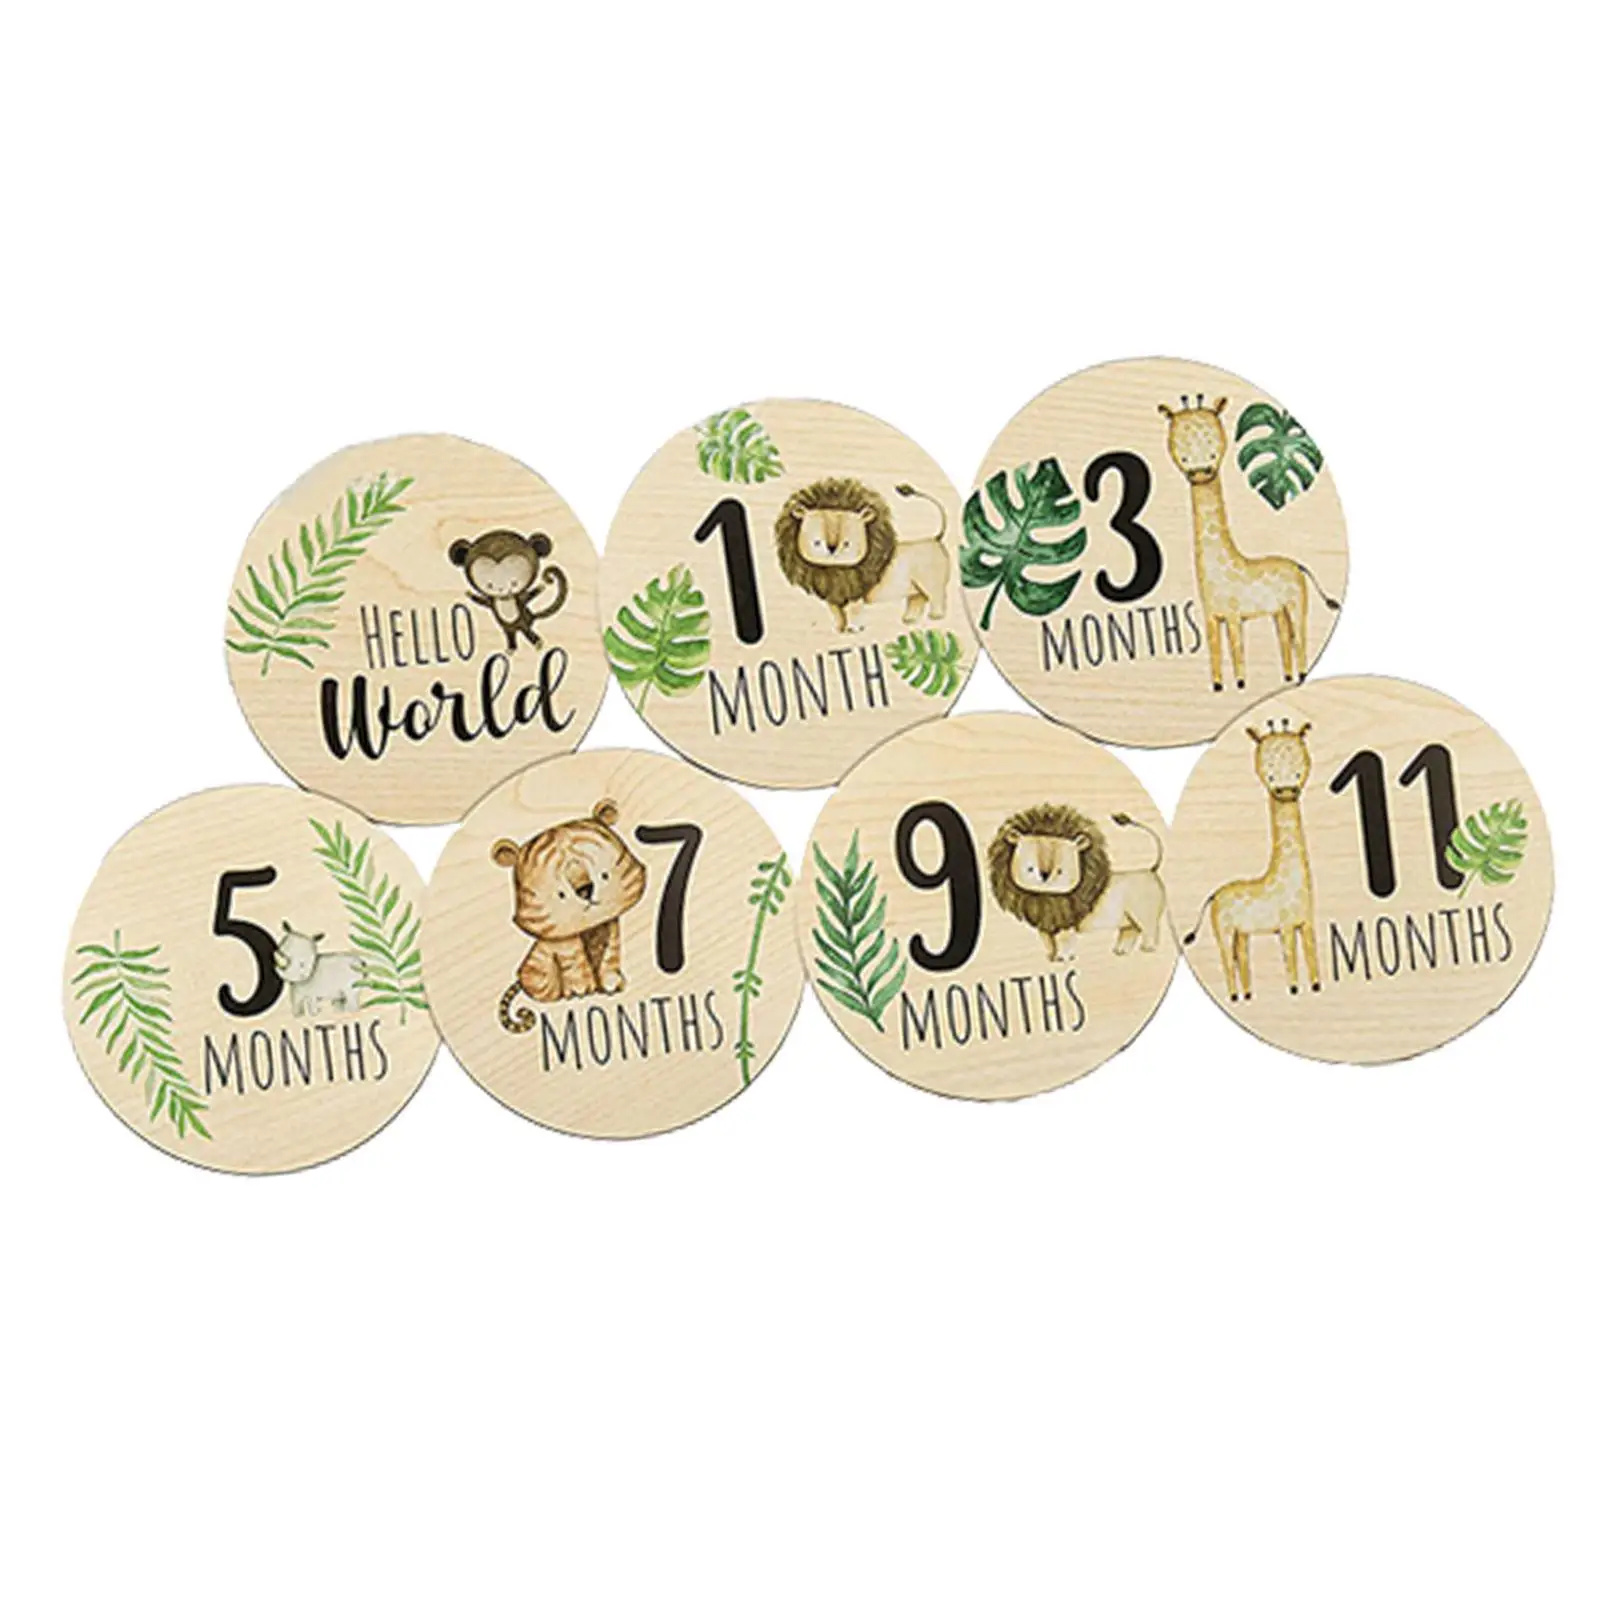 7x Wooden Baby Milestone Cards Baby Months Signs 1-12 Months Milestone Markers for Baby Growth Baby Shower